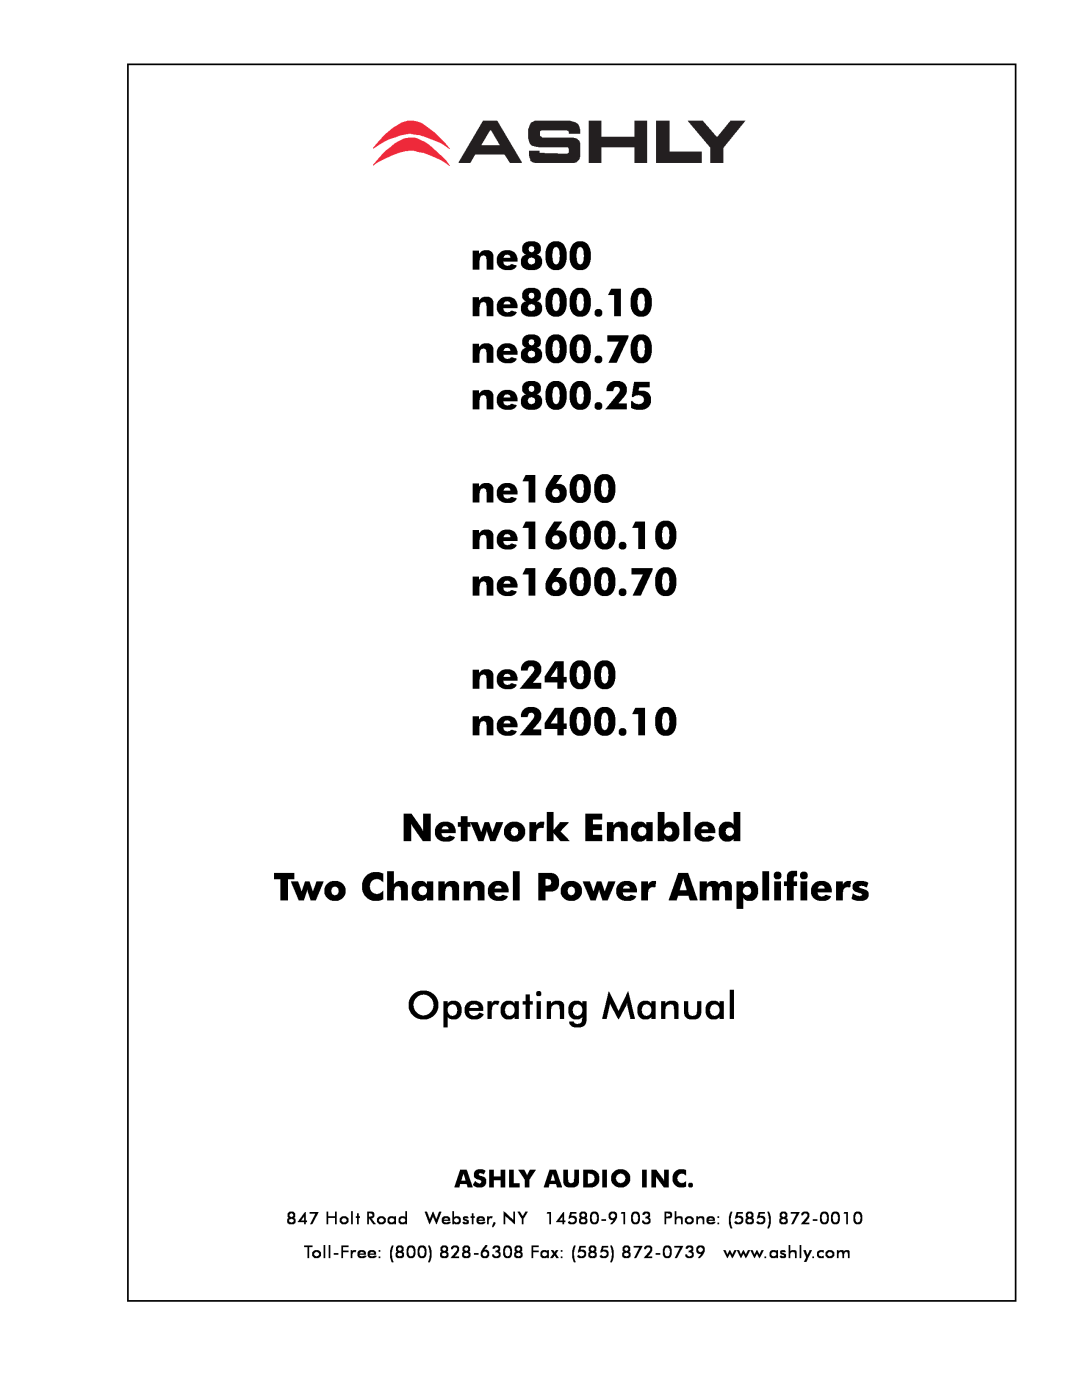 Ashly NE800 manual ne800 ne800.10 ne800.70 ne800.25 ne1600 ne1600.10, ne1600.70 ne2400 ne2400.10 Network Enabled 